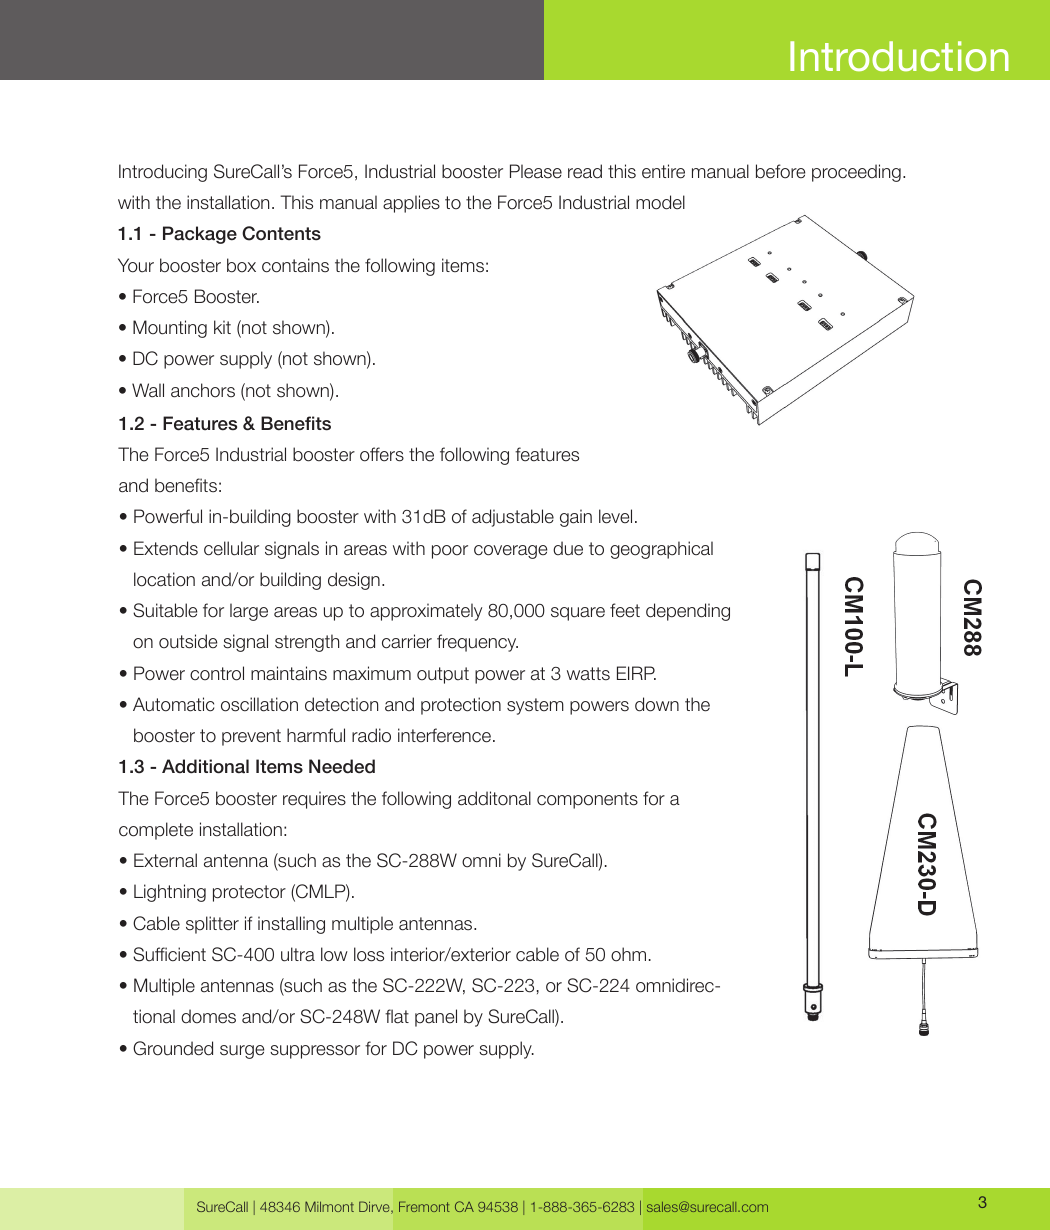 SureCall | 48346 Milmont Dirve, Fremont CA 94538 | 1-888-365-6283 | sales@surecall.com 3IntroductionIntroducing SureCall’s Force5, Industrial booster Please read this entire manual before proceeding. with the installation. This manual applies to the Force5 Industrial model1.1 - Package ContentsYour booster box contains the following items: • Force5 Booster.• Mounting kit (not shown).• DC power supply (not shown).• Wall anchors (not shown).1.2 - Features &amp; BenetsThe Force5 Industrial booster oers the following featuresand benets:• Powerful in-building booster with 31dB of adjustable gain level.•  Extends cellular signals in areas with poor coverage due to geographical location and/or building design. •  Suitable for large areas up to approximately 80,000 square feet depending on outside signal strength and carrier frequency.• Power control maintains maximum output power at 3 watts EIRP.•  Automatic oscillation detection and protection system powers down the booster to prevent harmful radio interference.1.3 - Additional Items NeededThe Force5 booster requires the following additonal components for a complete installation: • External antenna (such as the SC-288W omni by SureCall).• Lightning protector (CMLP).• Cable splitter if installing multiple antennas.• Sucient SC-400 ultra low loss interior/exterior cable of 50 ohm.•  Multiple antennas (such as the SC-222W, SC-223, or SC-224 omnidirec-tional domes and/or SC-248W at panel by SureCall).•  Grounded surge suppressor for DC power supply.